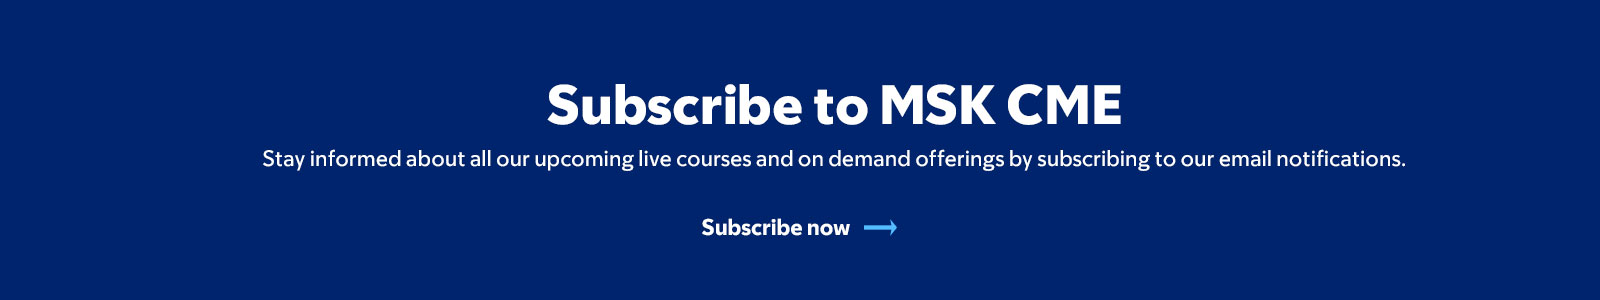 Subscribe to MSK CME Announcements